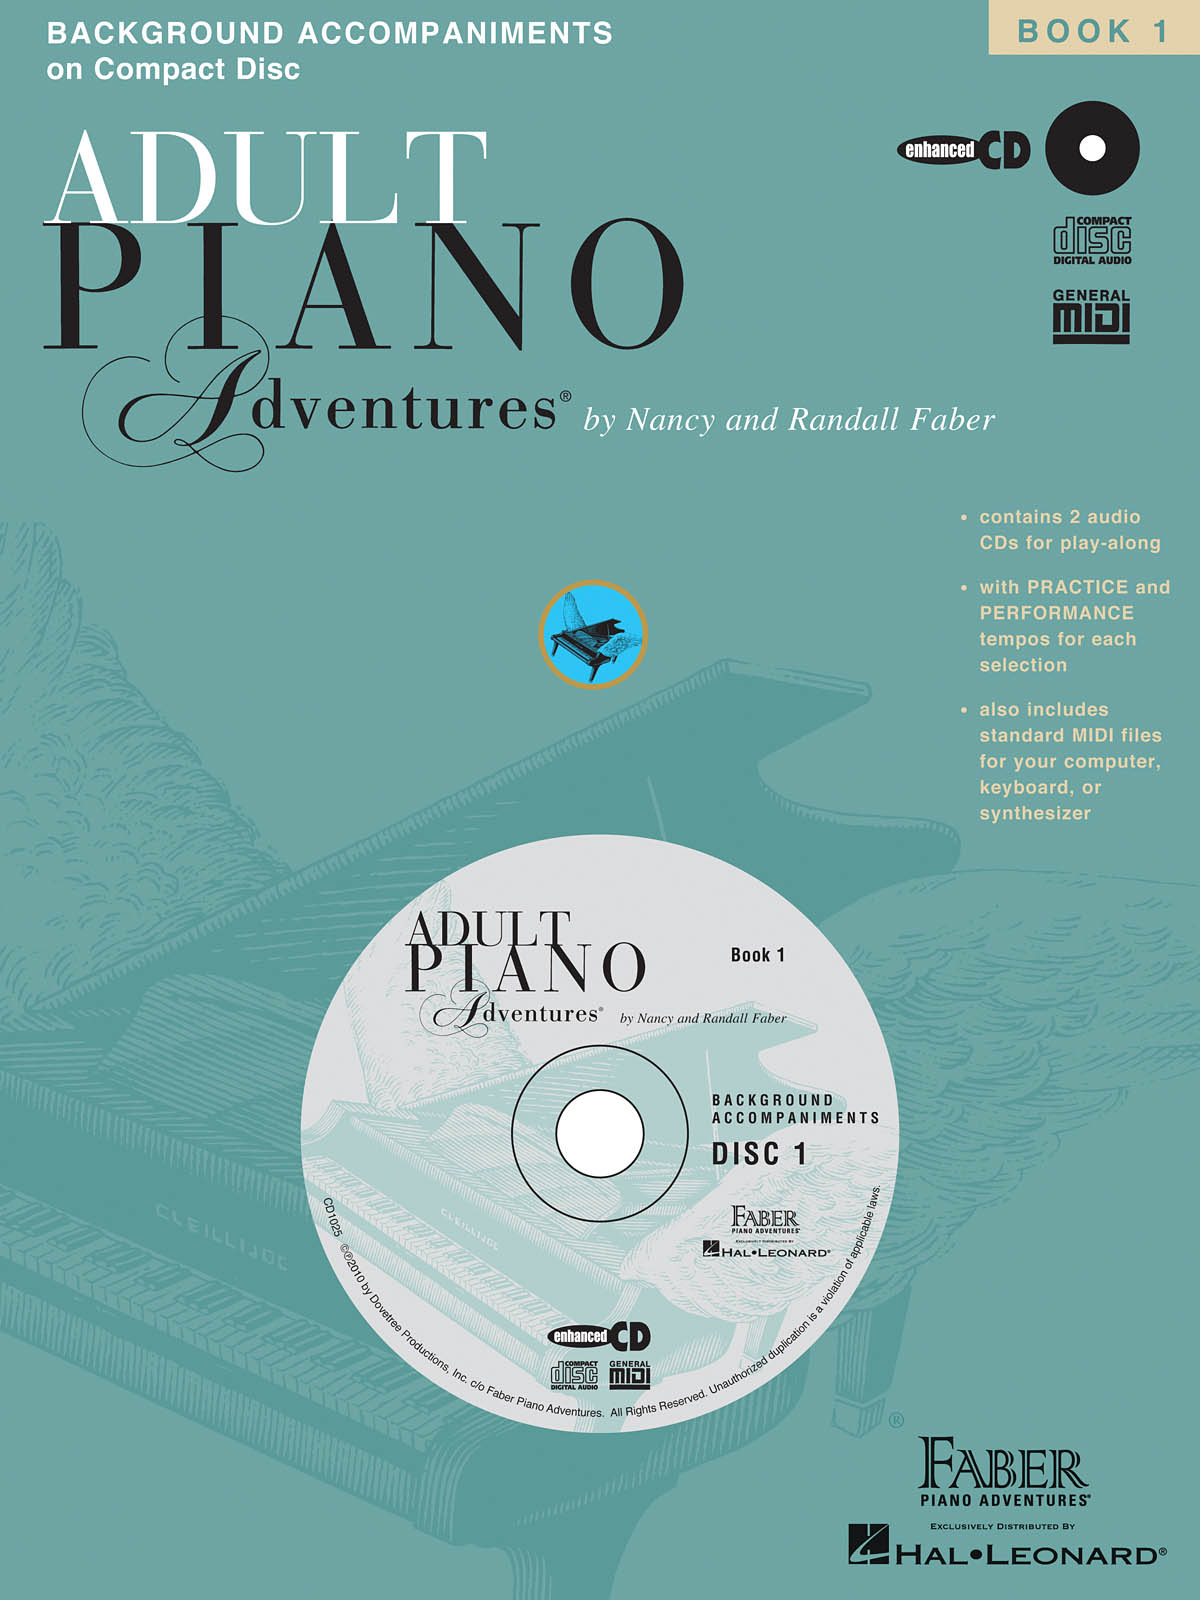 Adult Piano Adventures All-in-One Lesson Book 1 - Background Accompaniment CD (Audio & MIDI)